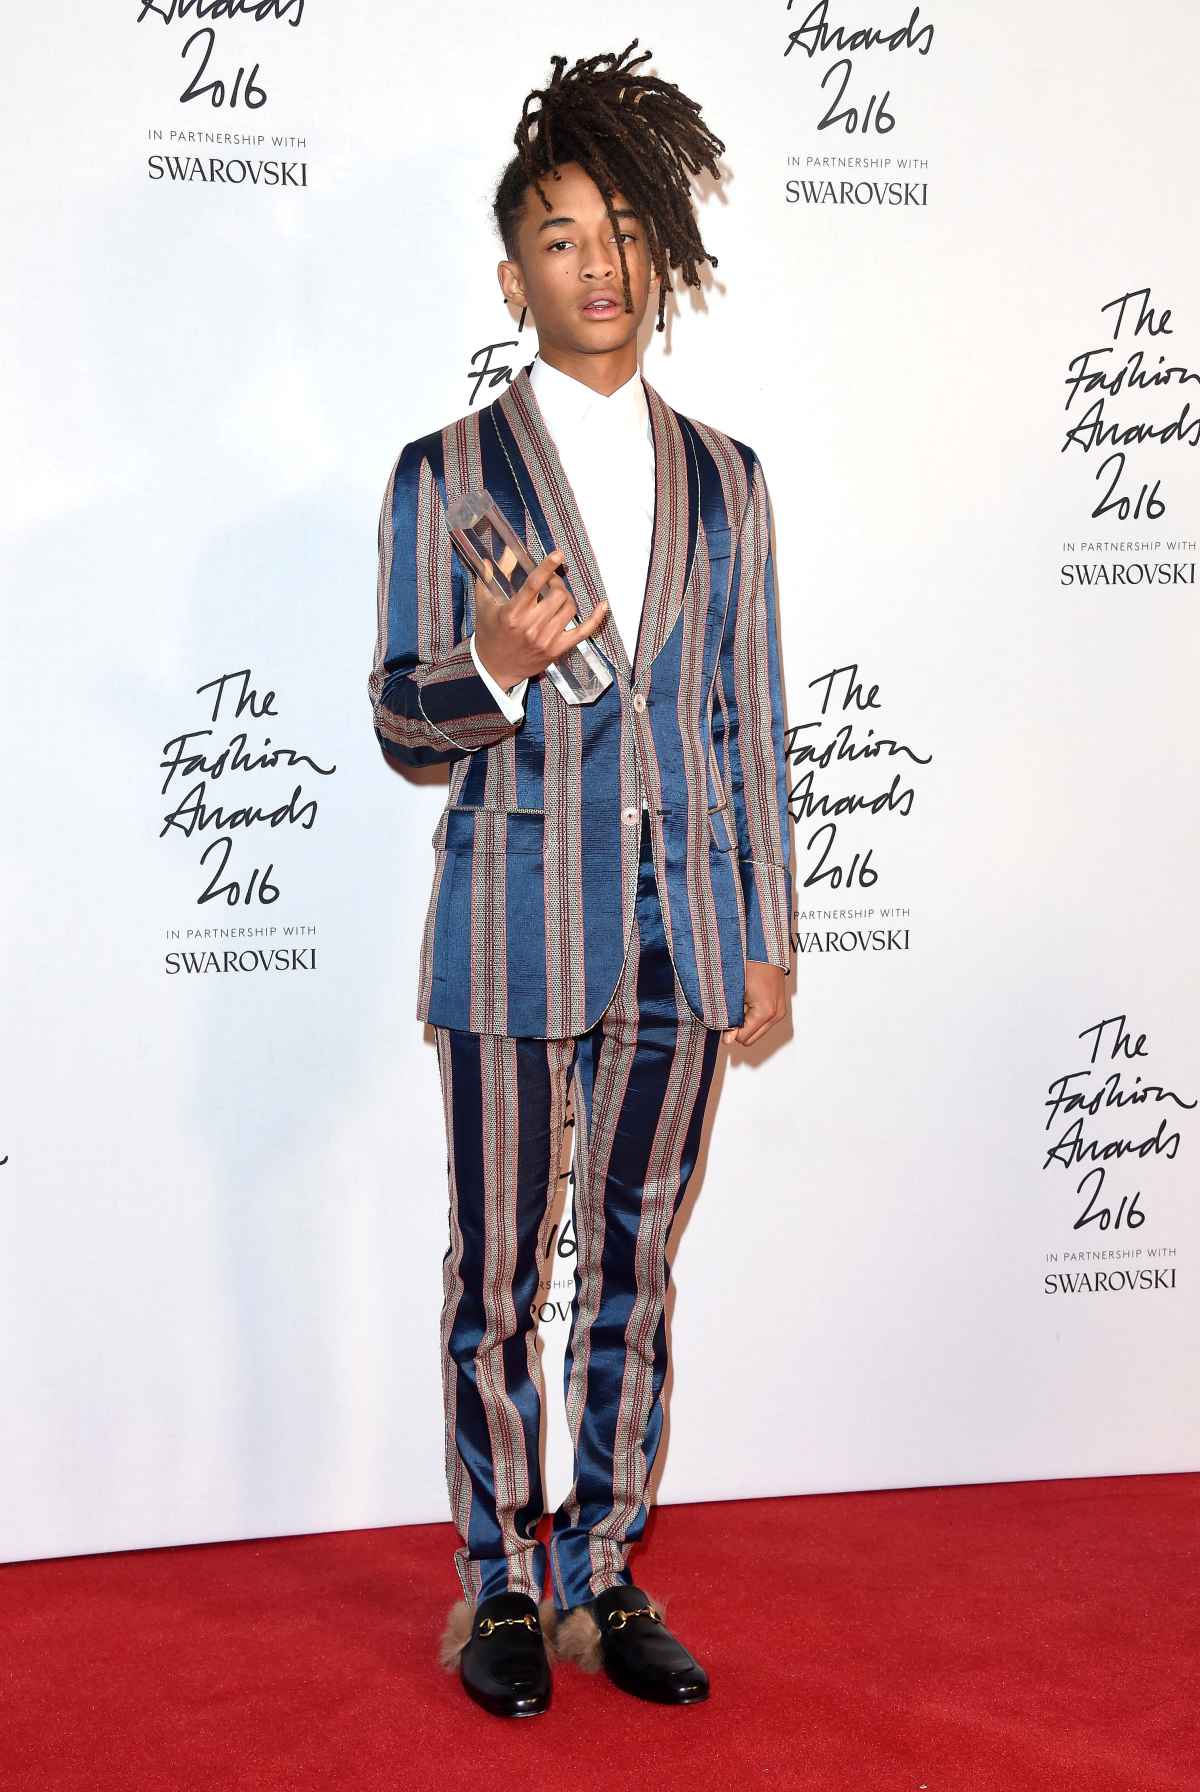 Jaden Smith's Best Style: The Edgy Moments From 2018 So Far